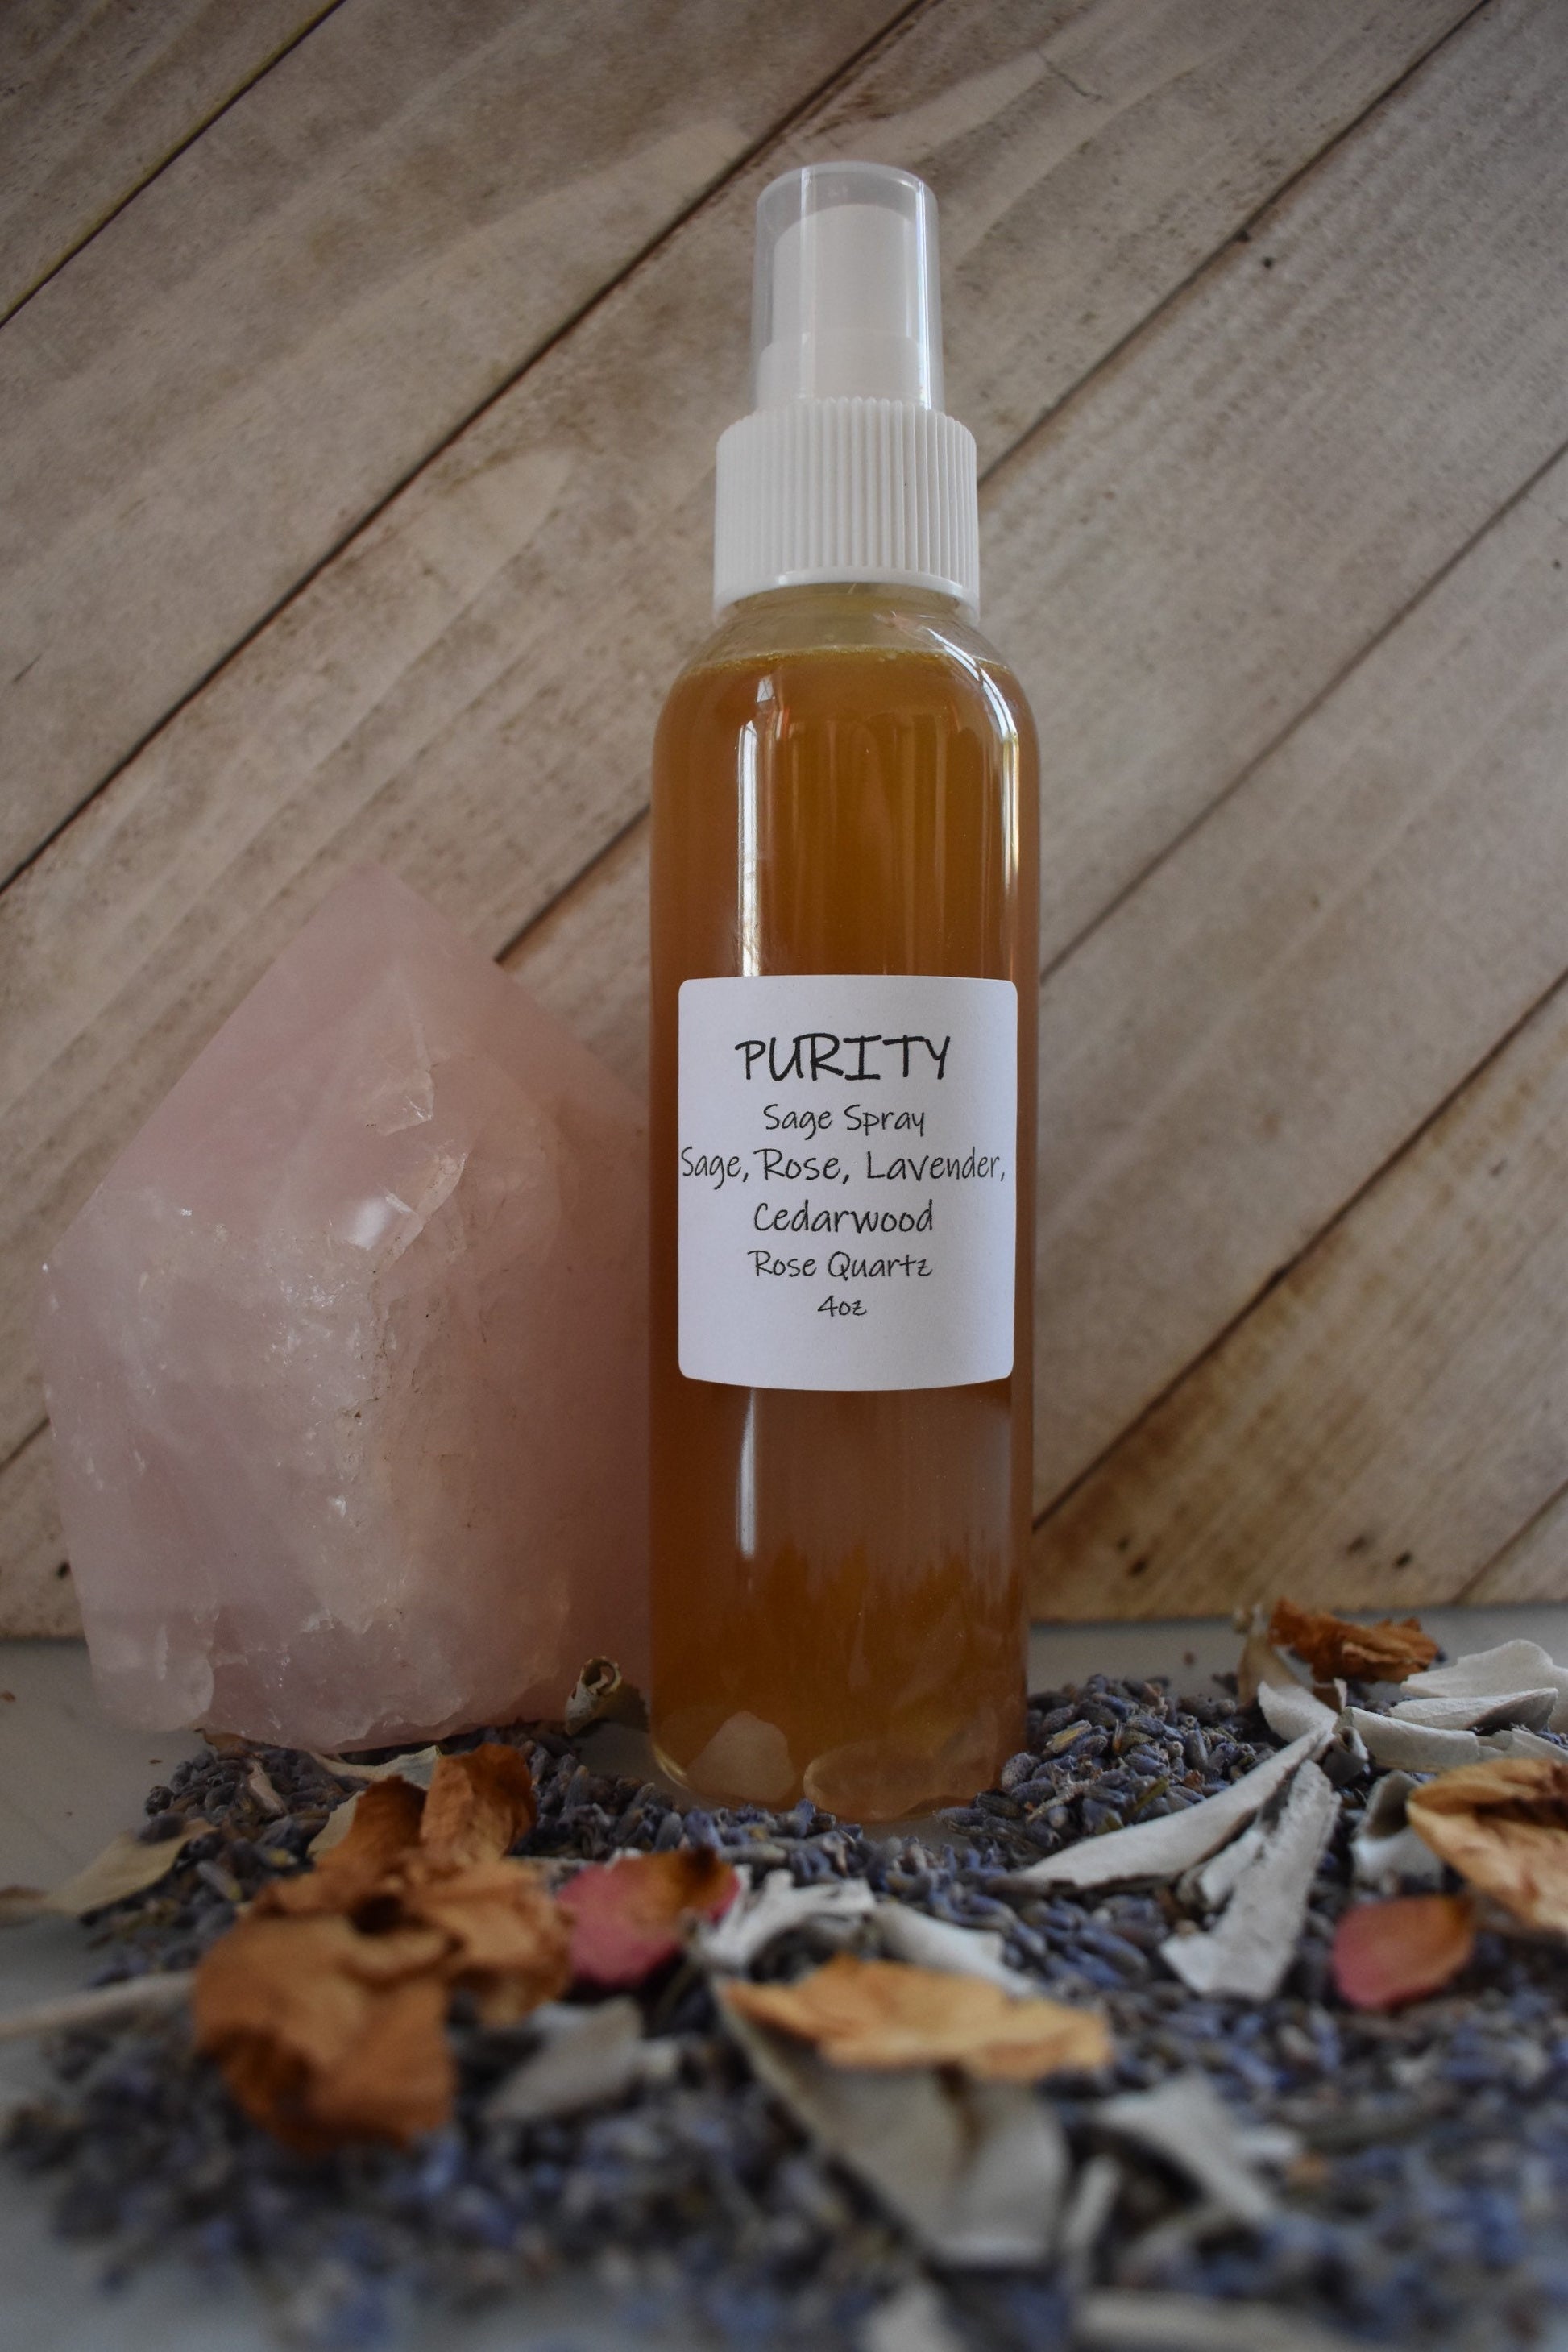 Purity - Heart Opener/Cleansing spray infused with Rose Quartz